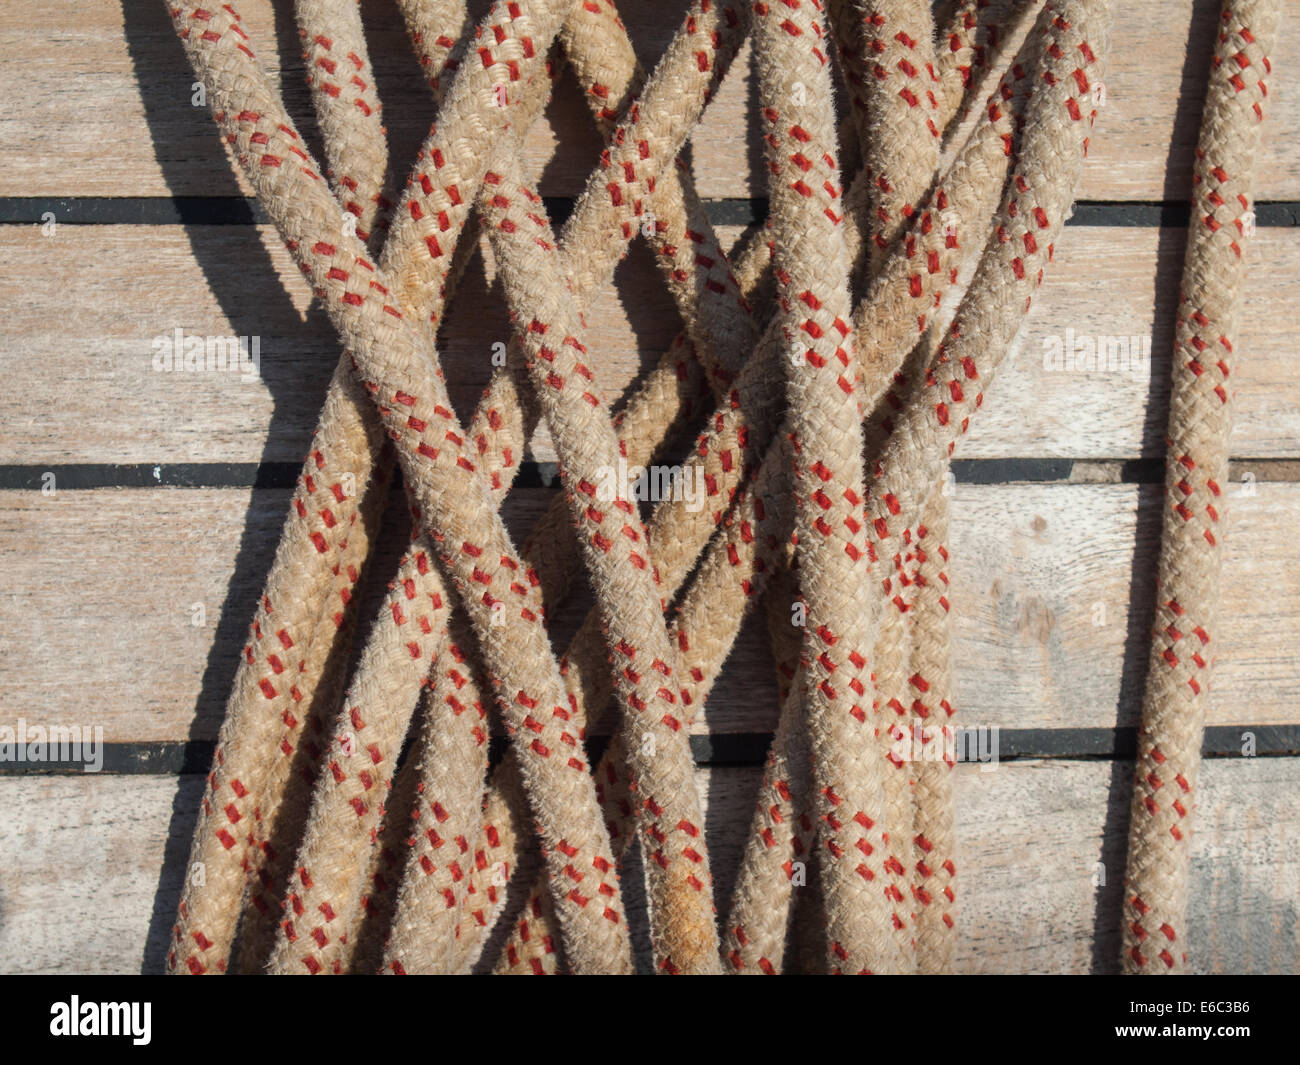 detail of ships rope with teak deck behind Stock Photo